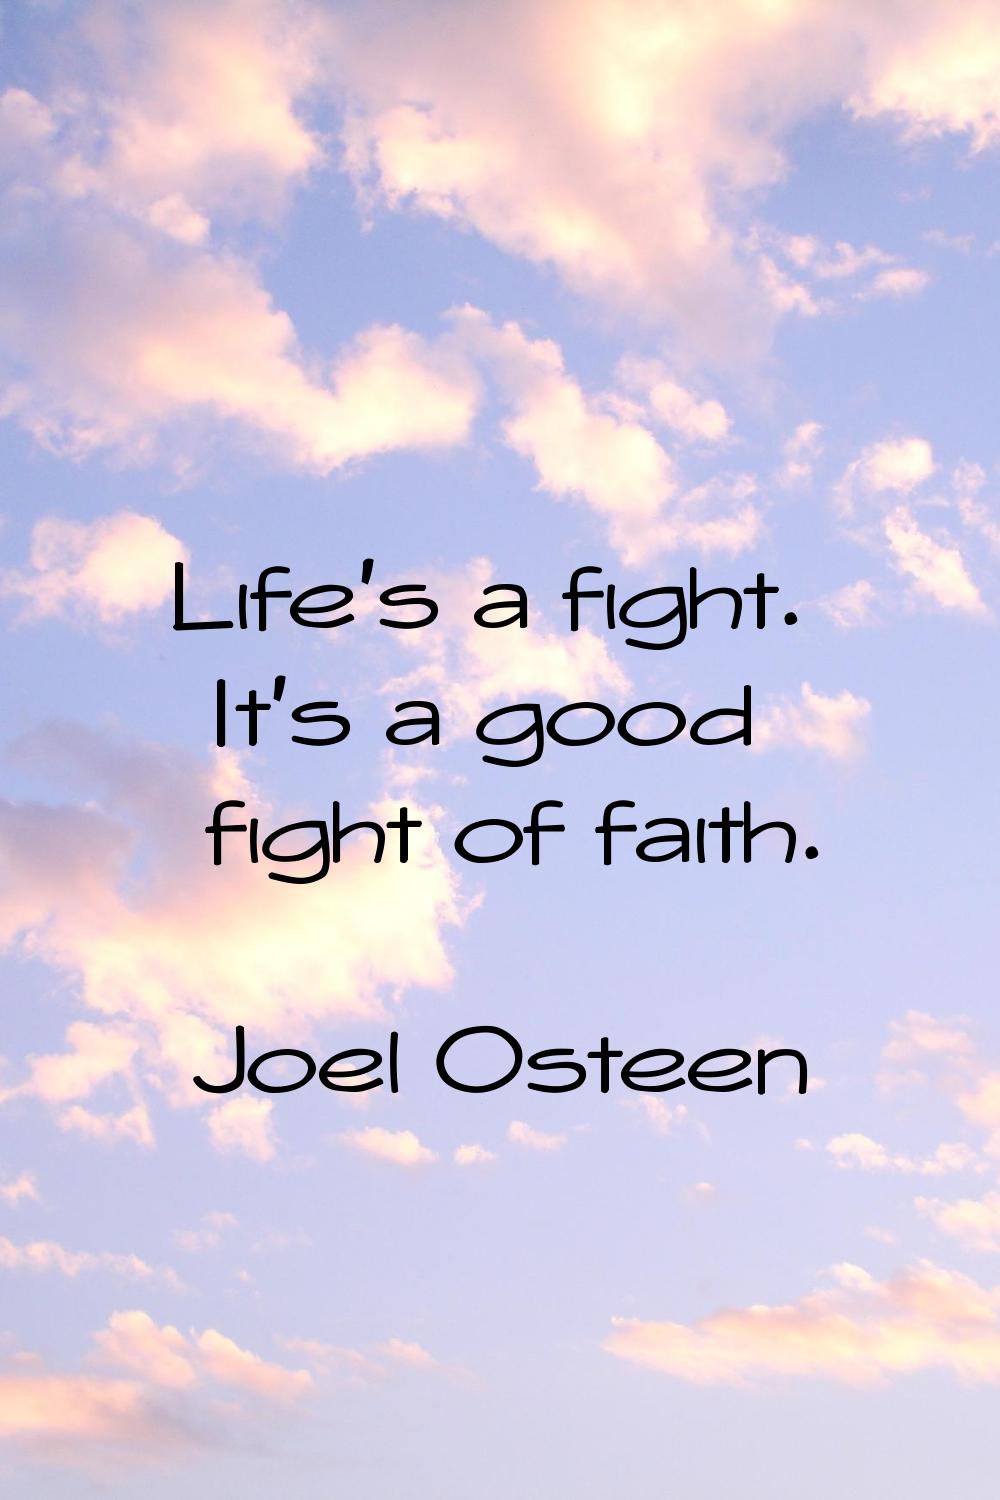 Life's a fight. It's a good fight of faith.